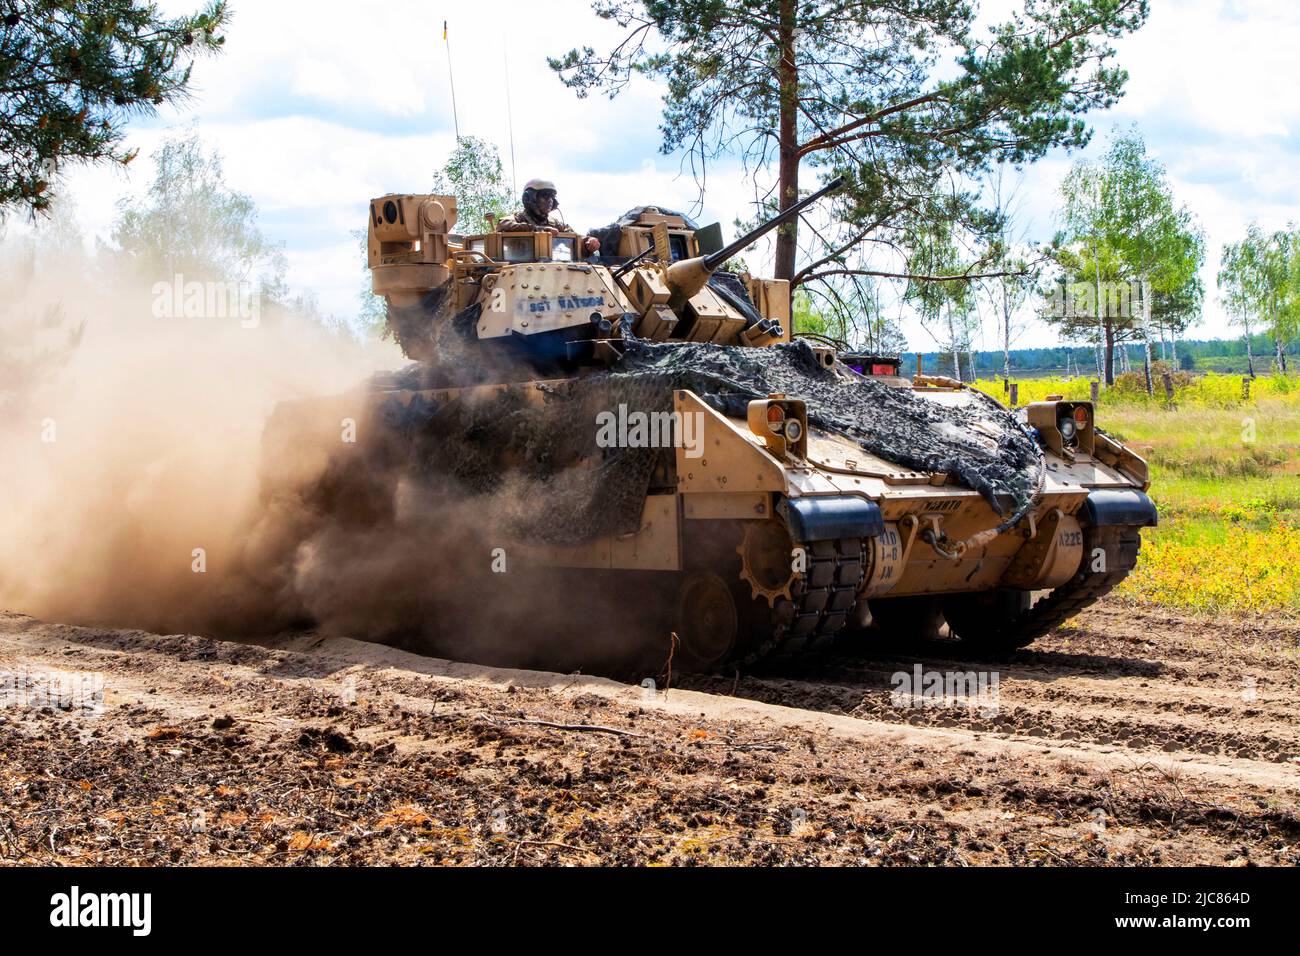 Germany. 24th May, 2022. An M2A3 Bradley fighting vehicle assigned to 1st Battalion, 8th Infantry Regiment, 3rd Armored Brigade Combat Team, 4th Infantry Division, advances during a live-fire exercise as part of DEFENDER-Europe 22 at Oberlausitz Training Area, Germany, May 24, 2022. DEFENDER-Europe 22 is a series of U.S. Army Europe and Africa multinational training exercises within U.S. European Command's Large Global Scale Exercise construct taking place in Eastern Europe. DEFENDER-Europe 22 demonstrates U.S. Army Europe and Africa's ability to conduct large scale ground combat operatio Stock Photo